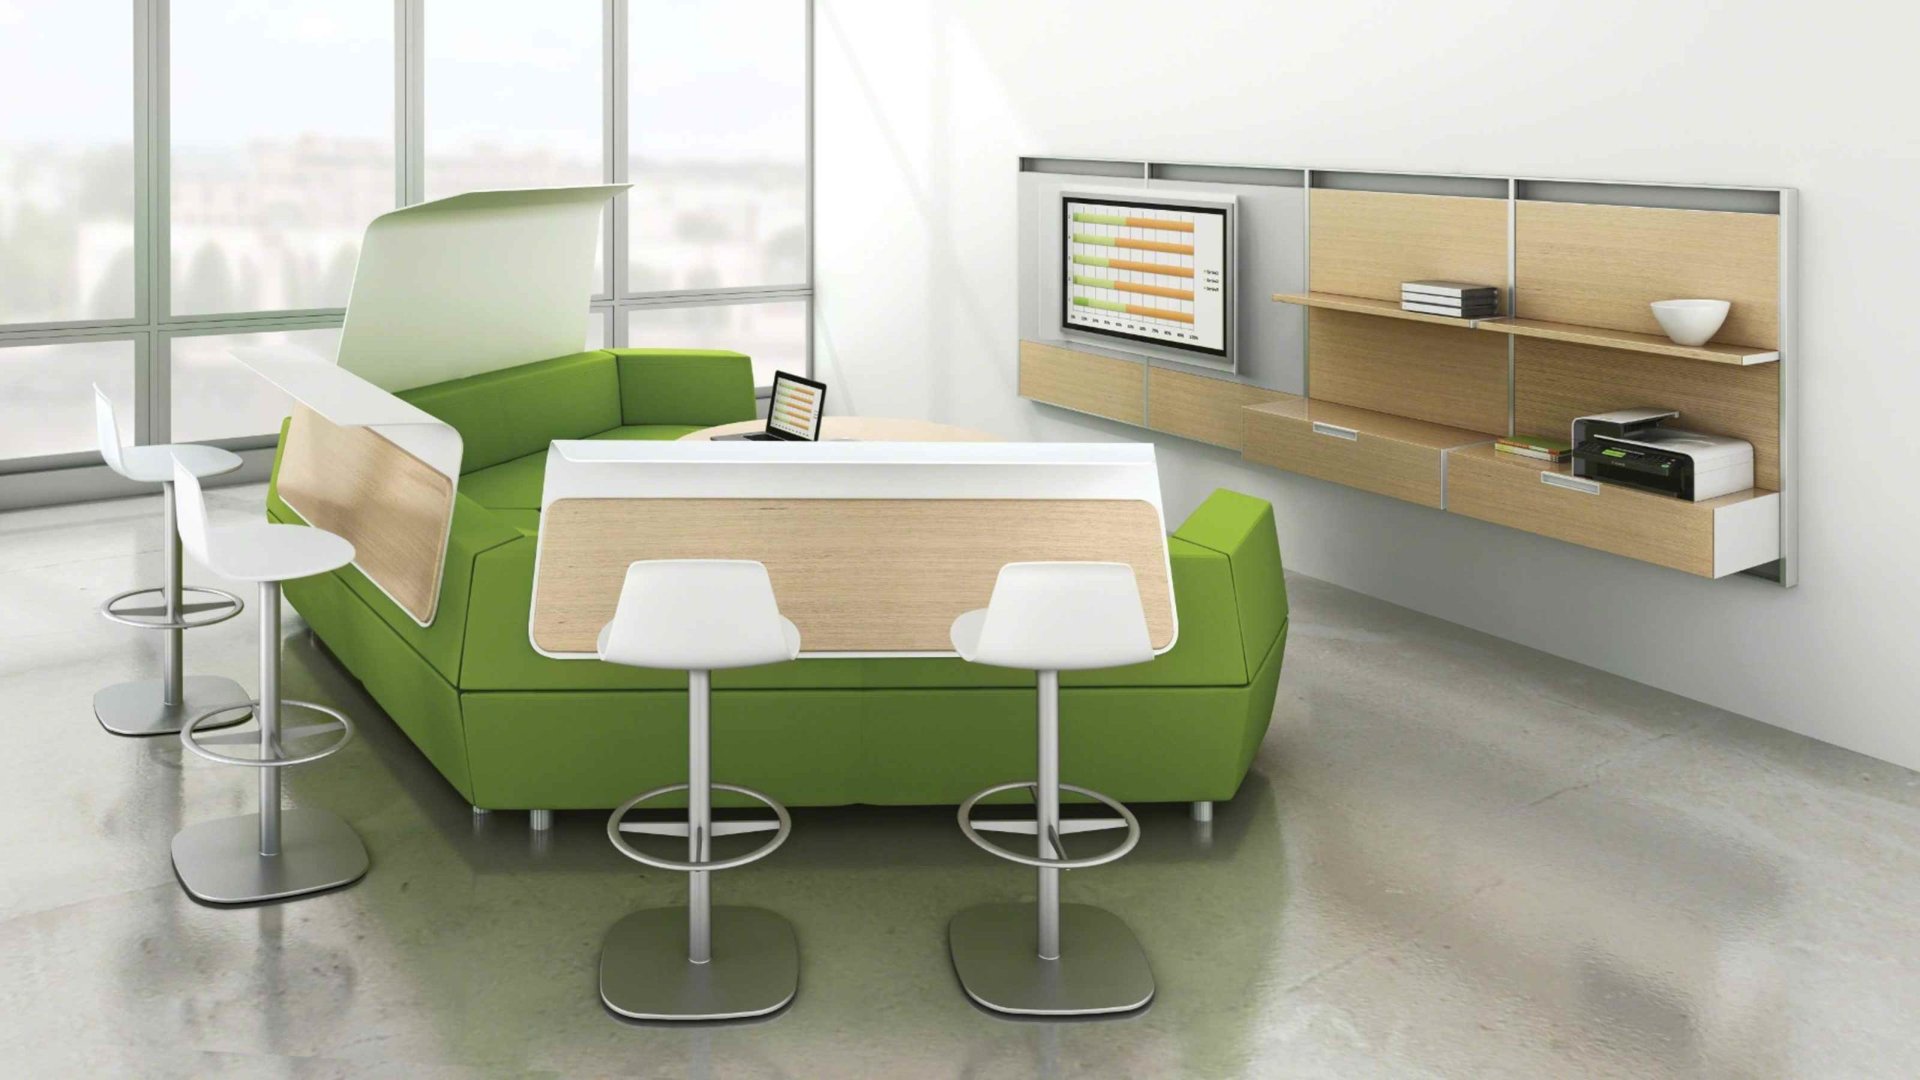 Steelcase - Media Scape Lounge - Lounge Seating - 05